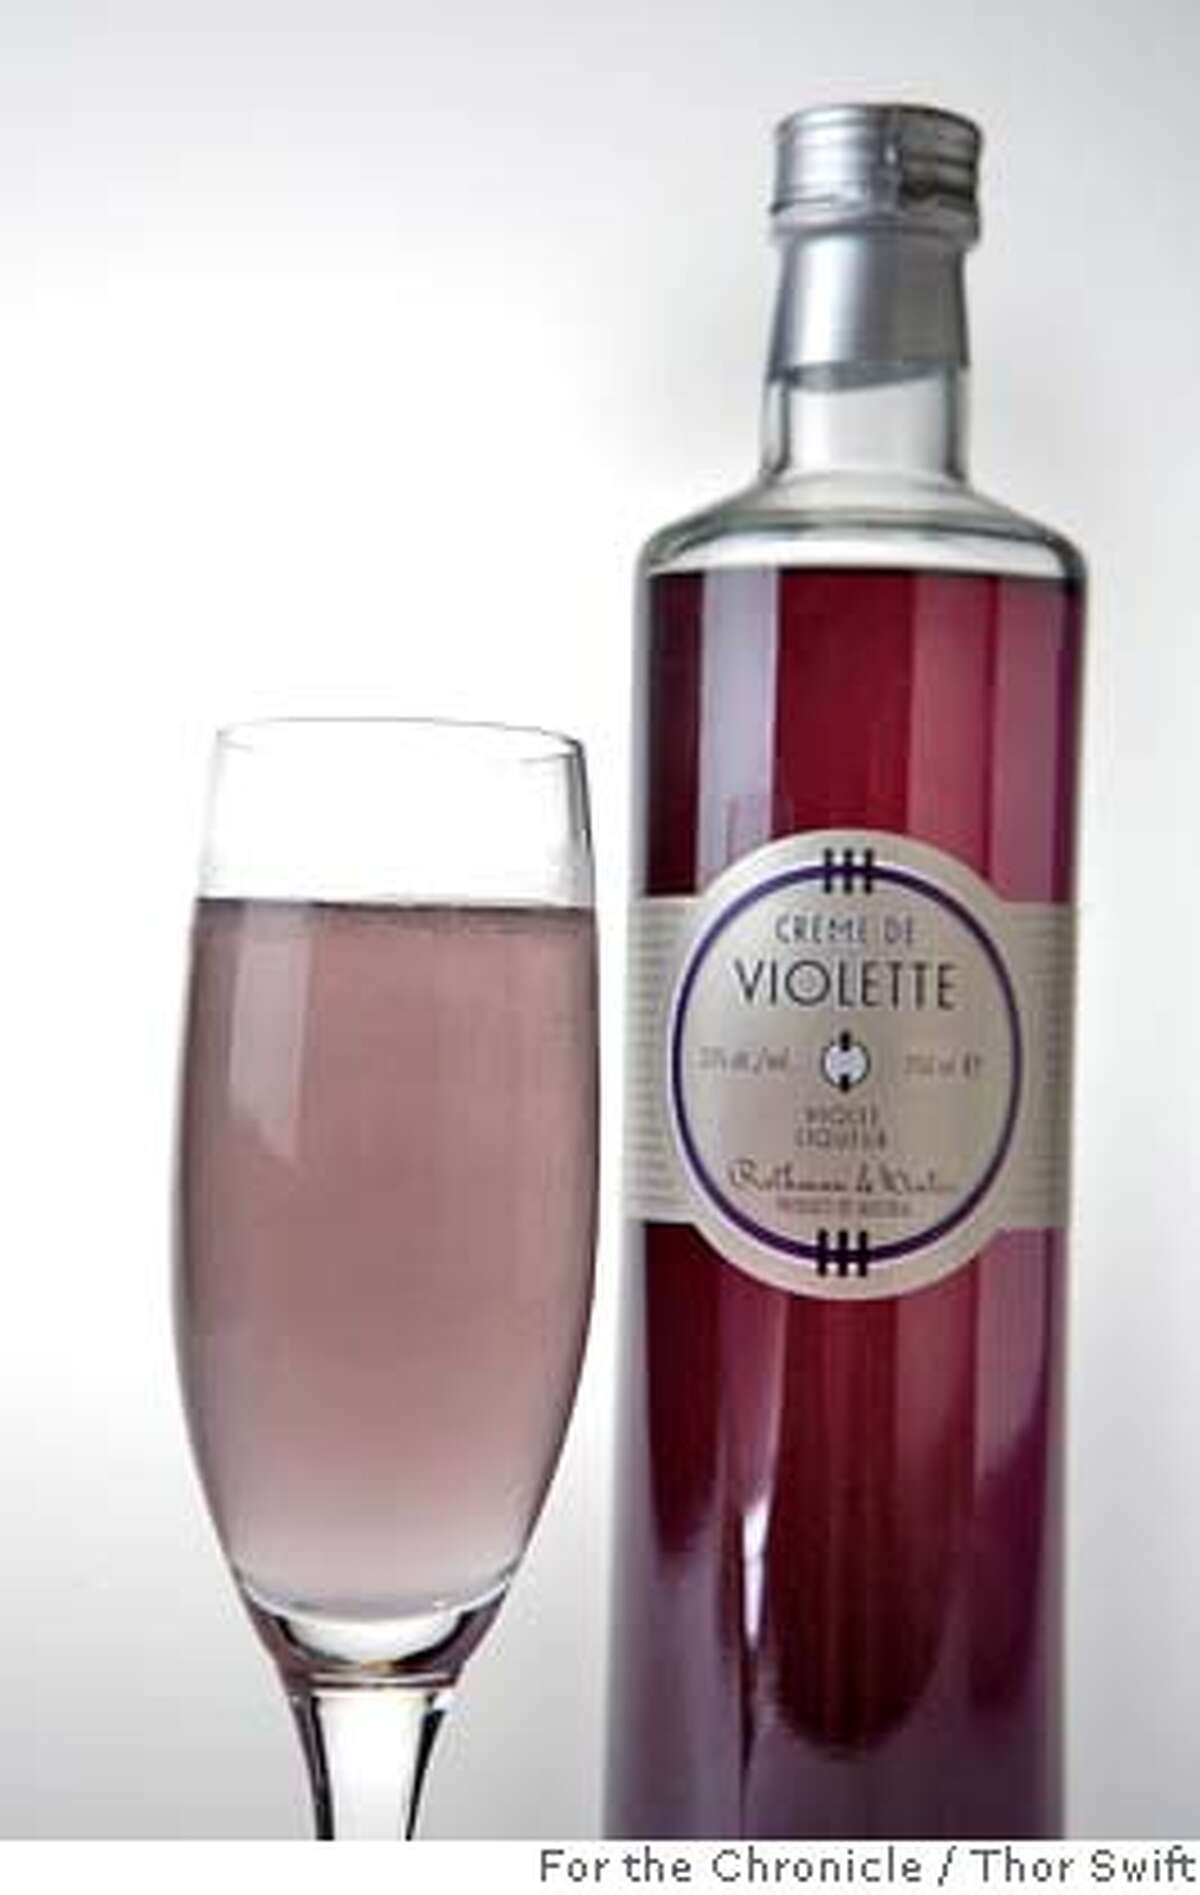 The Moonlight Coctail and bottle of Creme de Violette. Photograph taken Thursday, Sept. 13, 2007 at the San Francisco Chronicle studio. Thor Swift For The San Francisco Chronicle Ran on: 09-28-2007